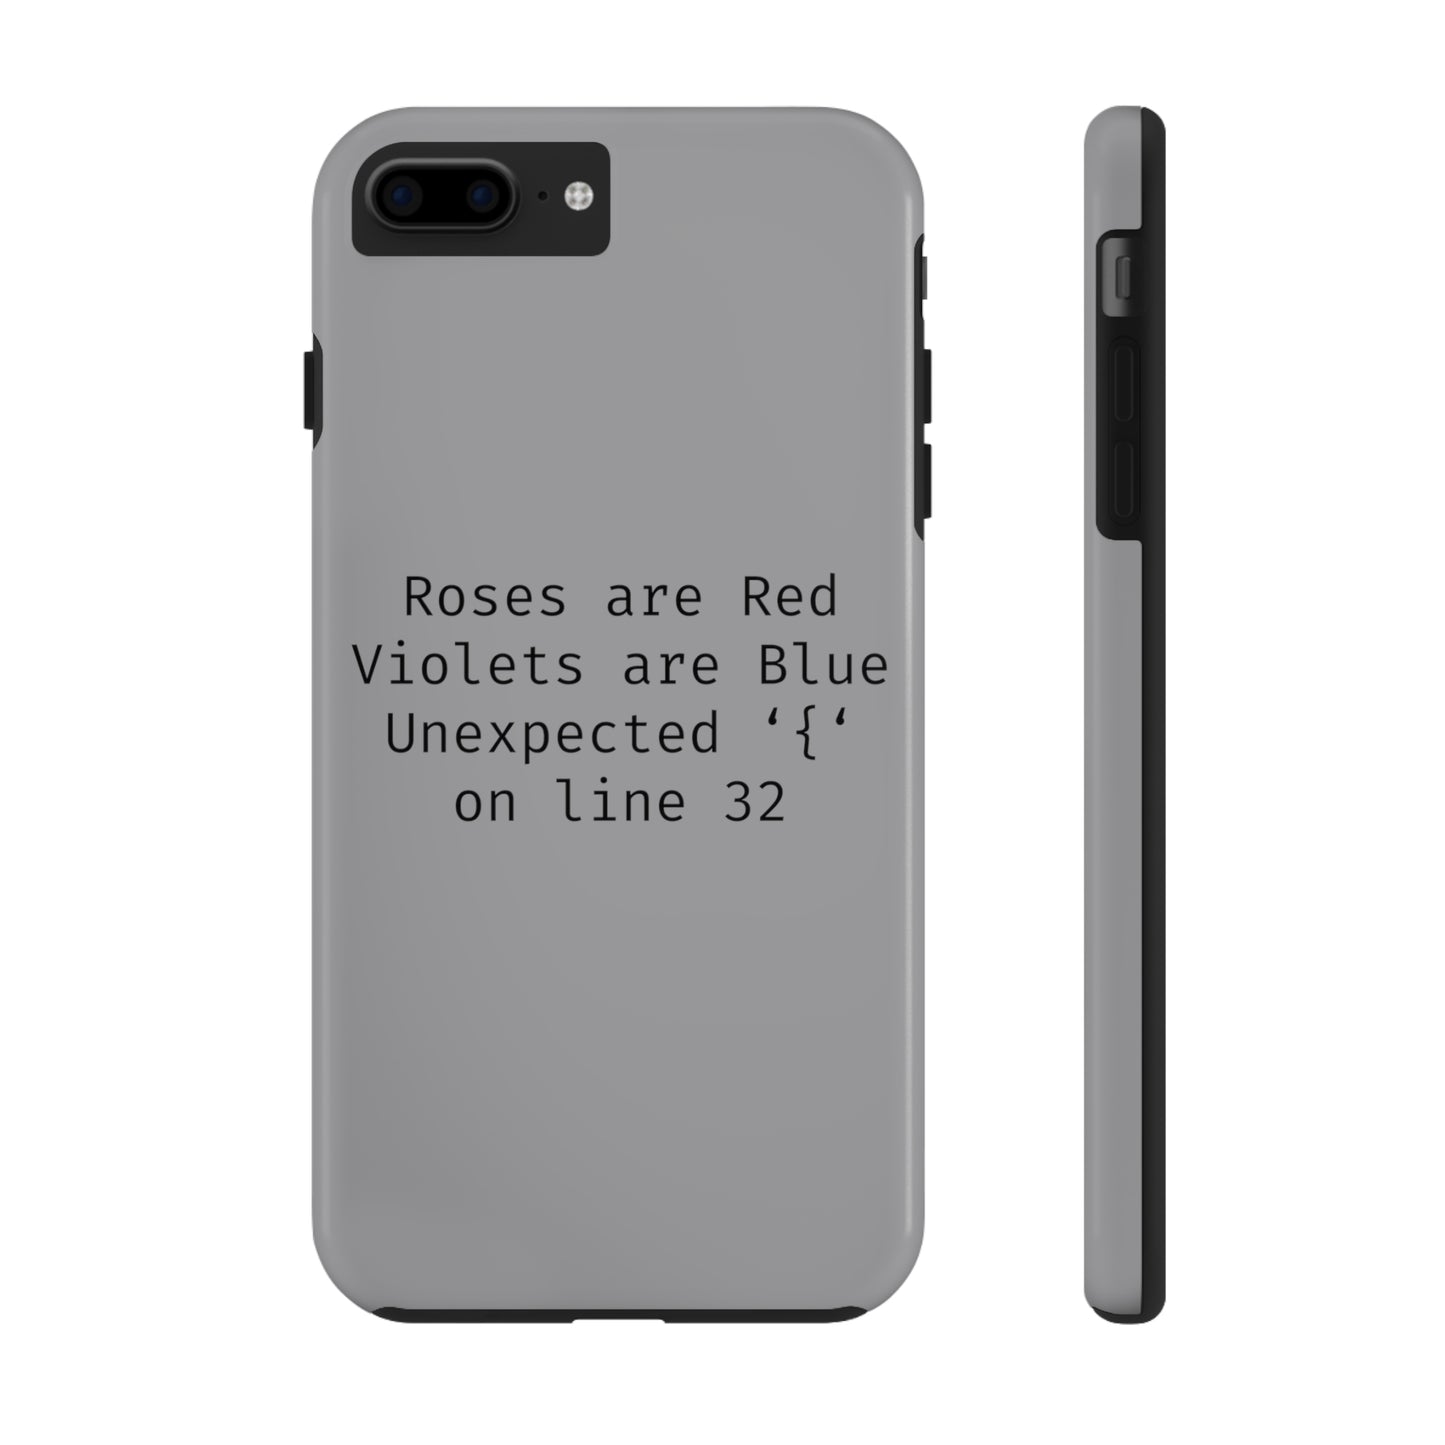 Roses are Red Programming IT for Computer Security Hackers Tough Phone Cases Case-Mate